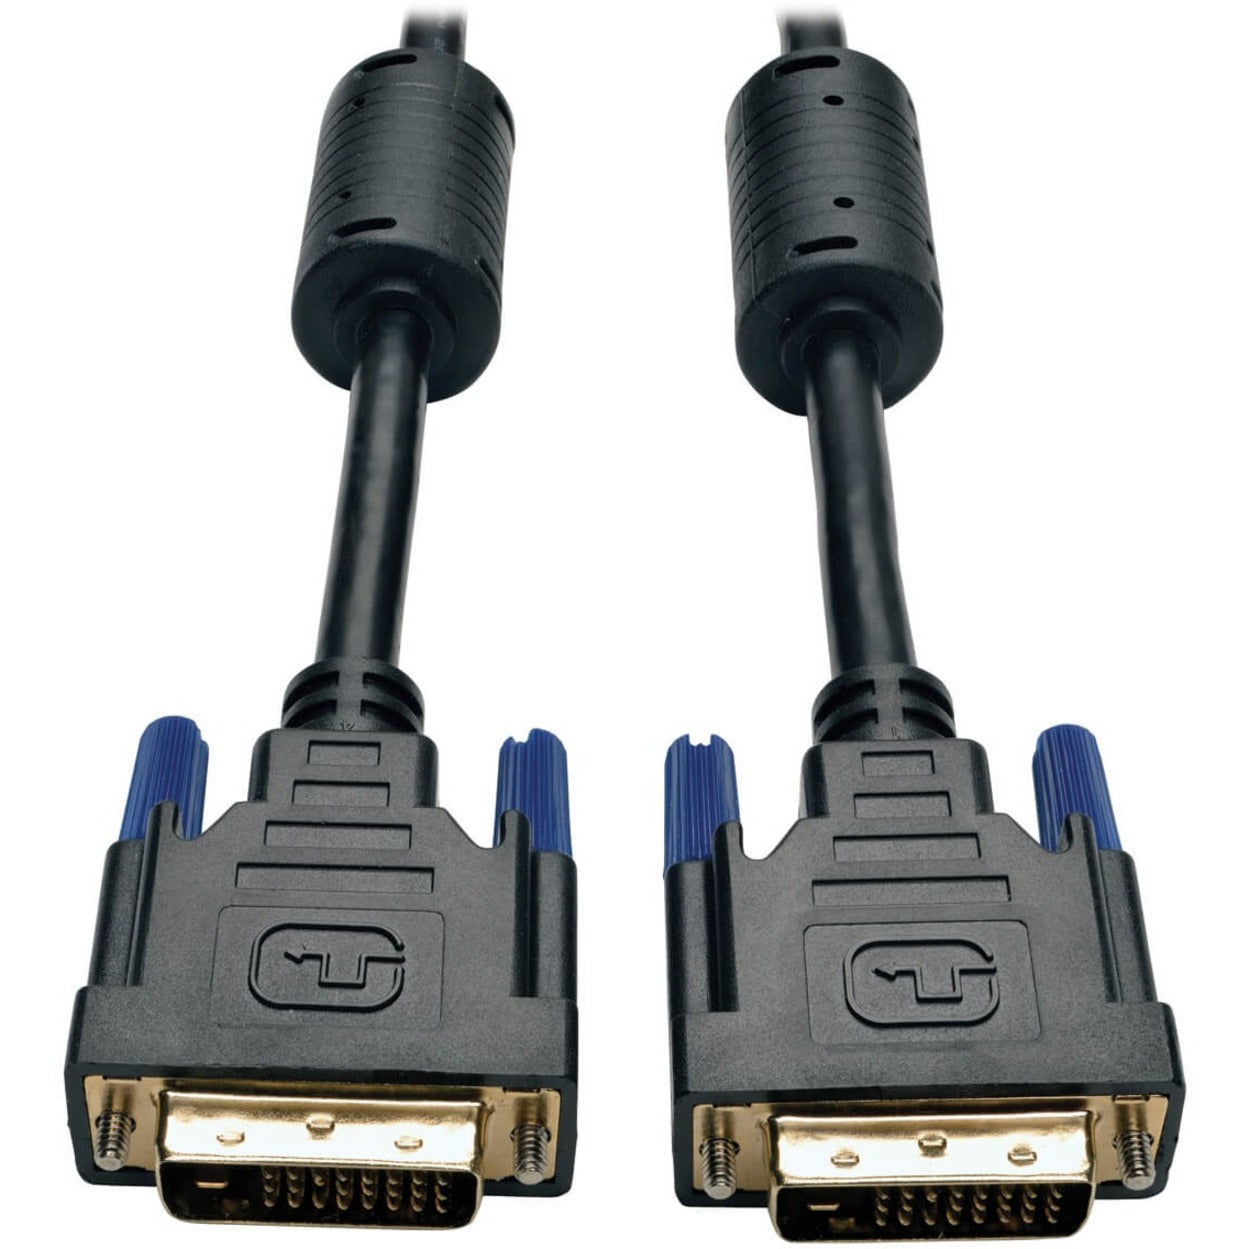 Tripp Lite P560-015 Display Cable, 15 ft, Molded, DVI-D (Dual-Link) Digital Video - Male